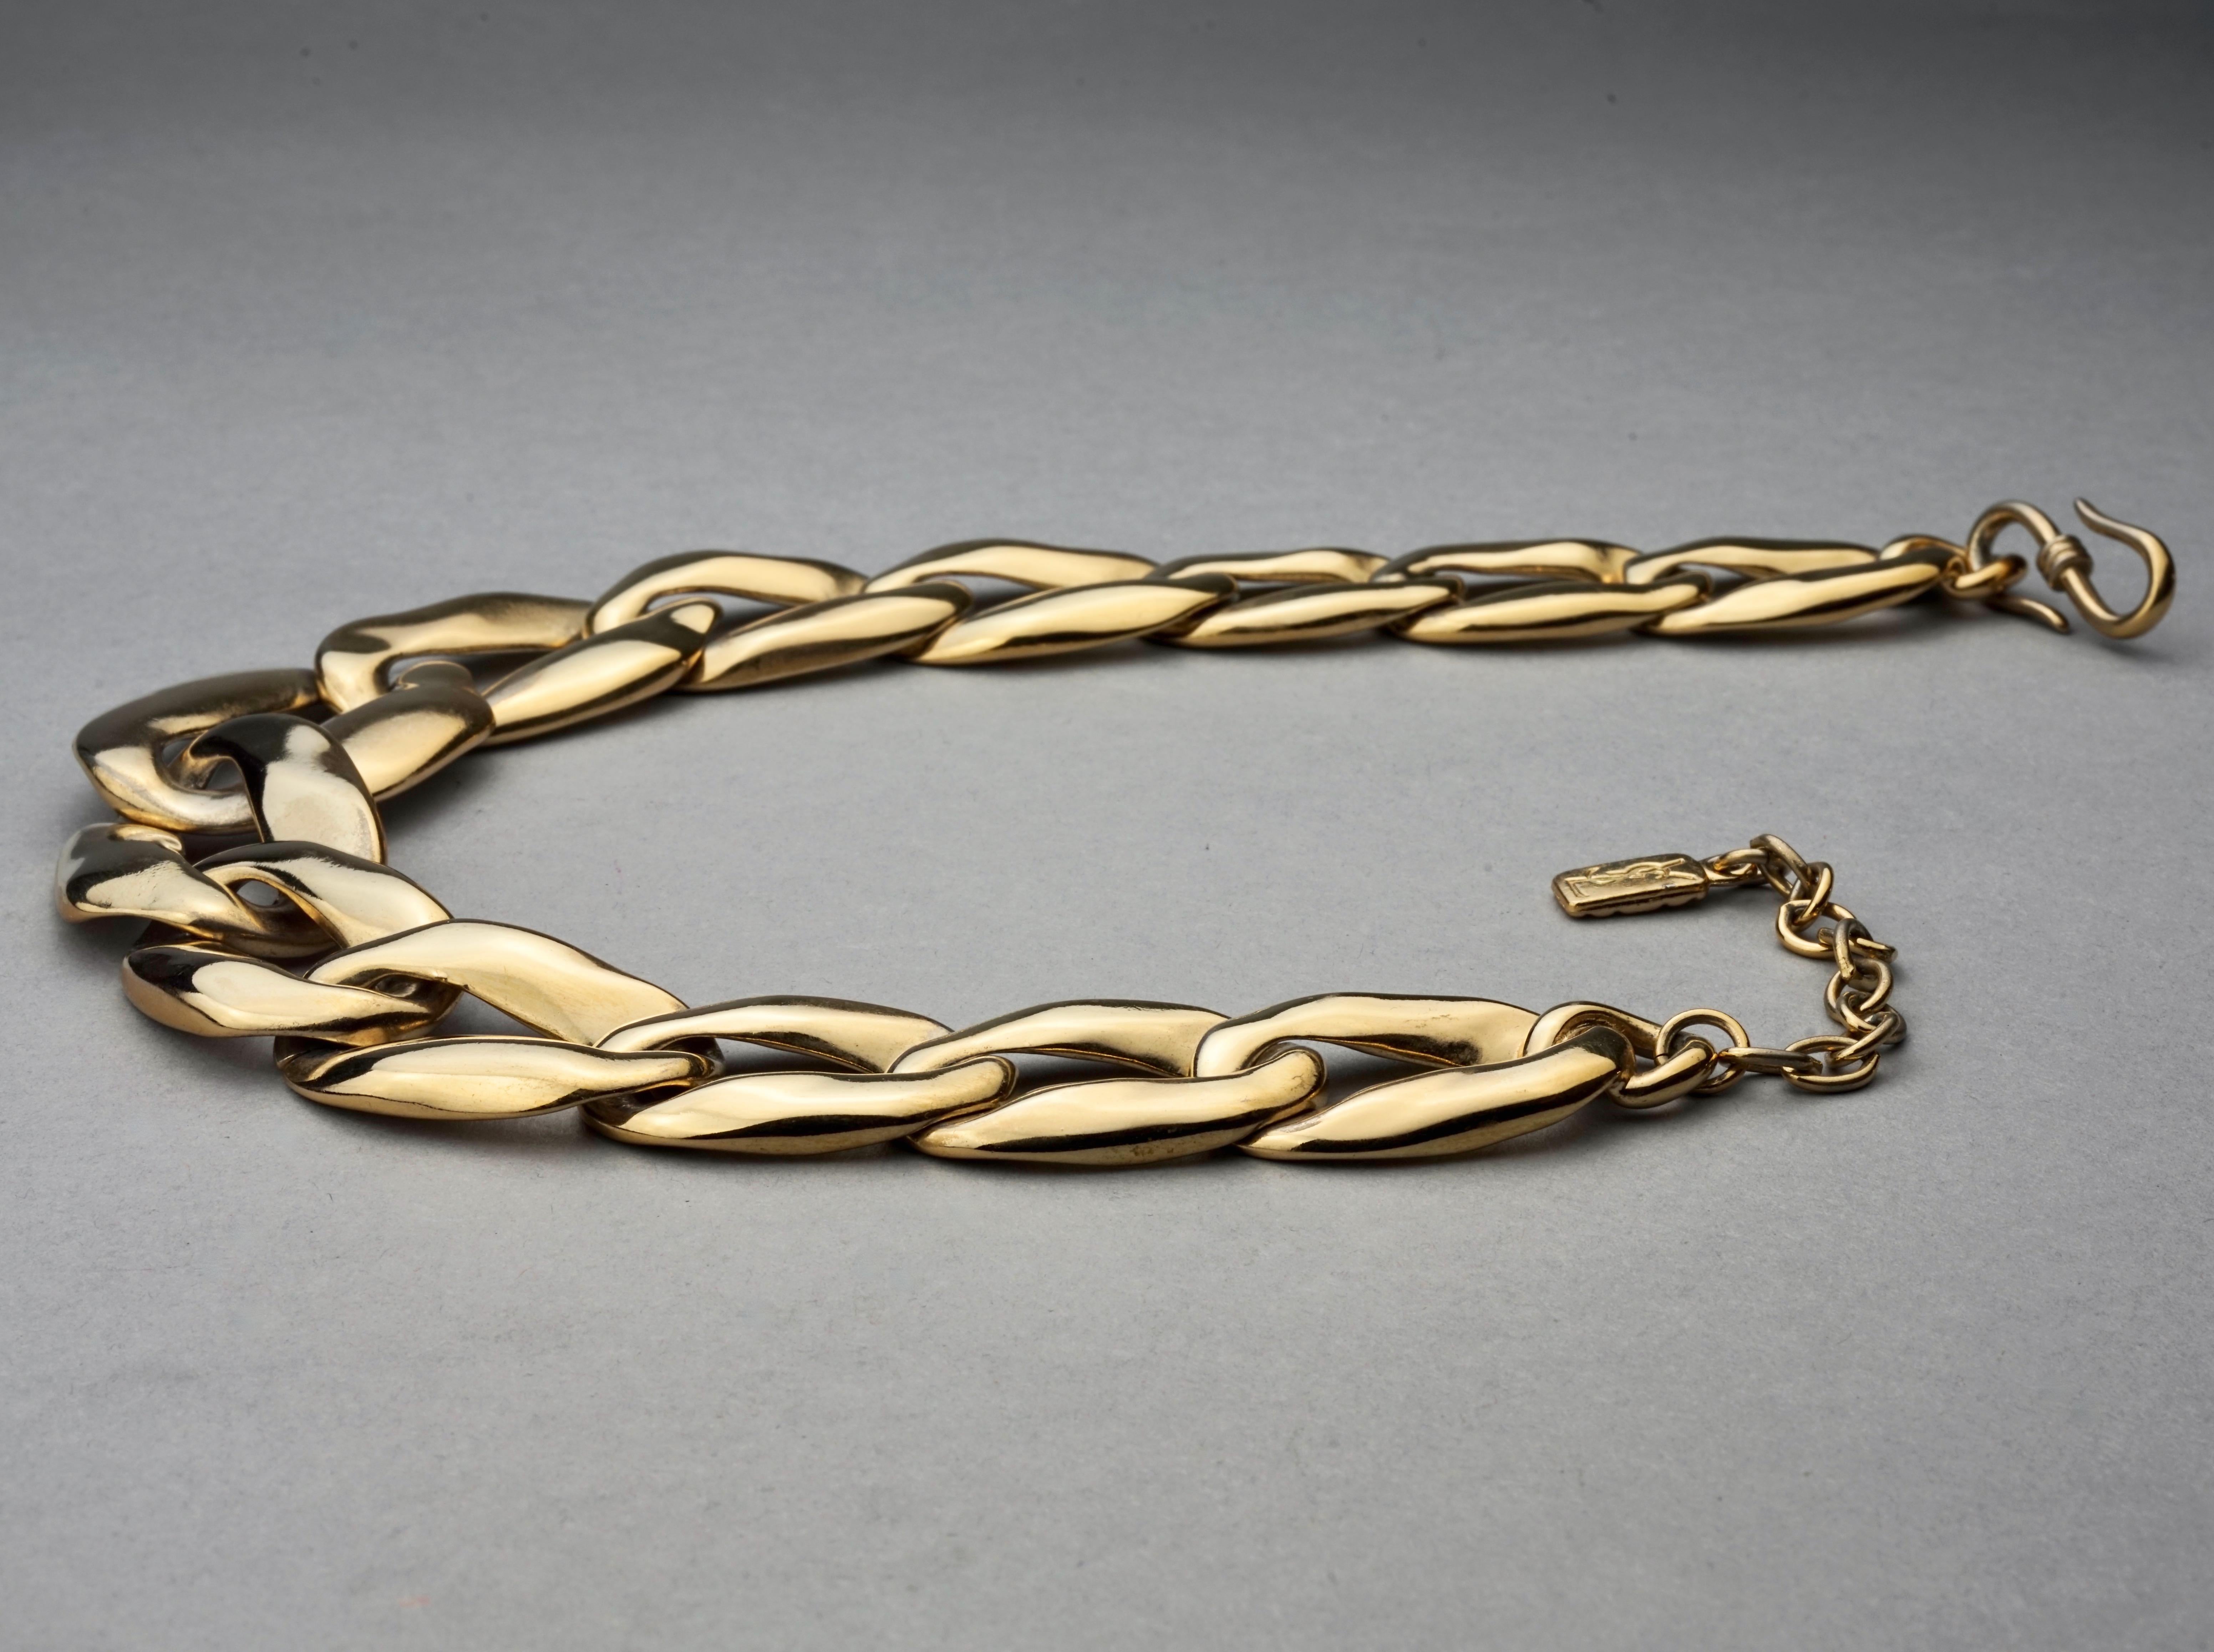 Vintage YVES SAINT LAURENT Ysl by Robert Goossens Chunky Chain Links Necklace 3